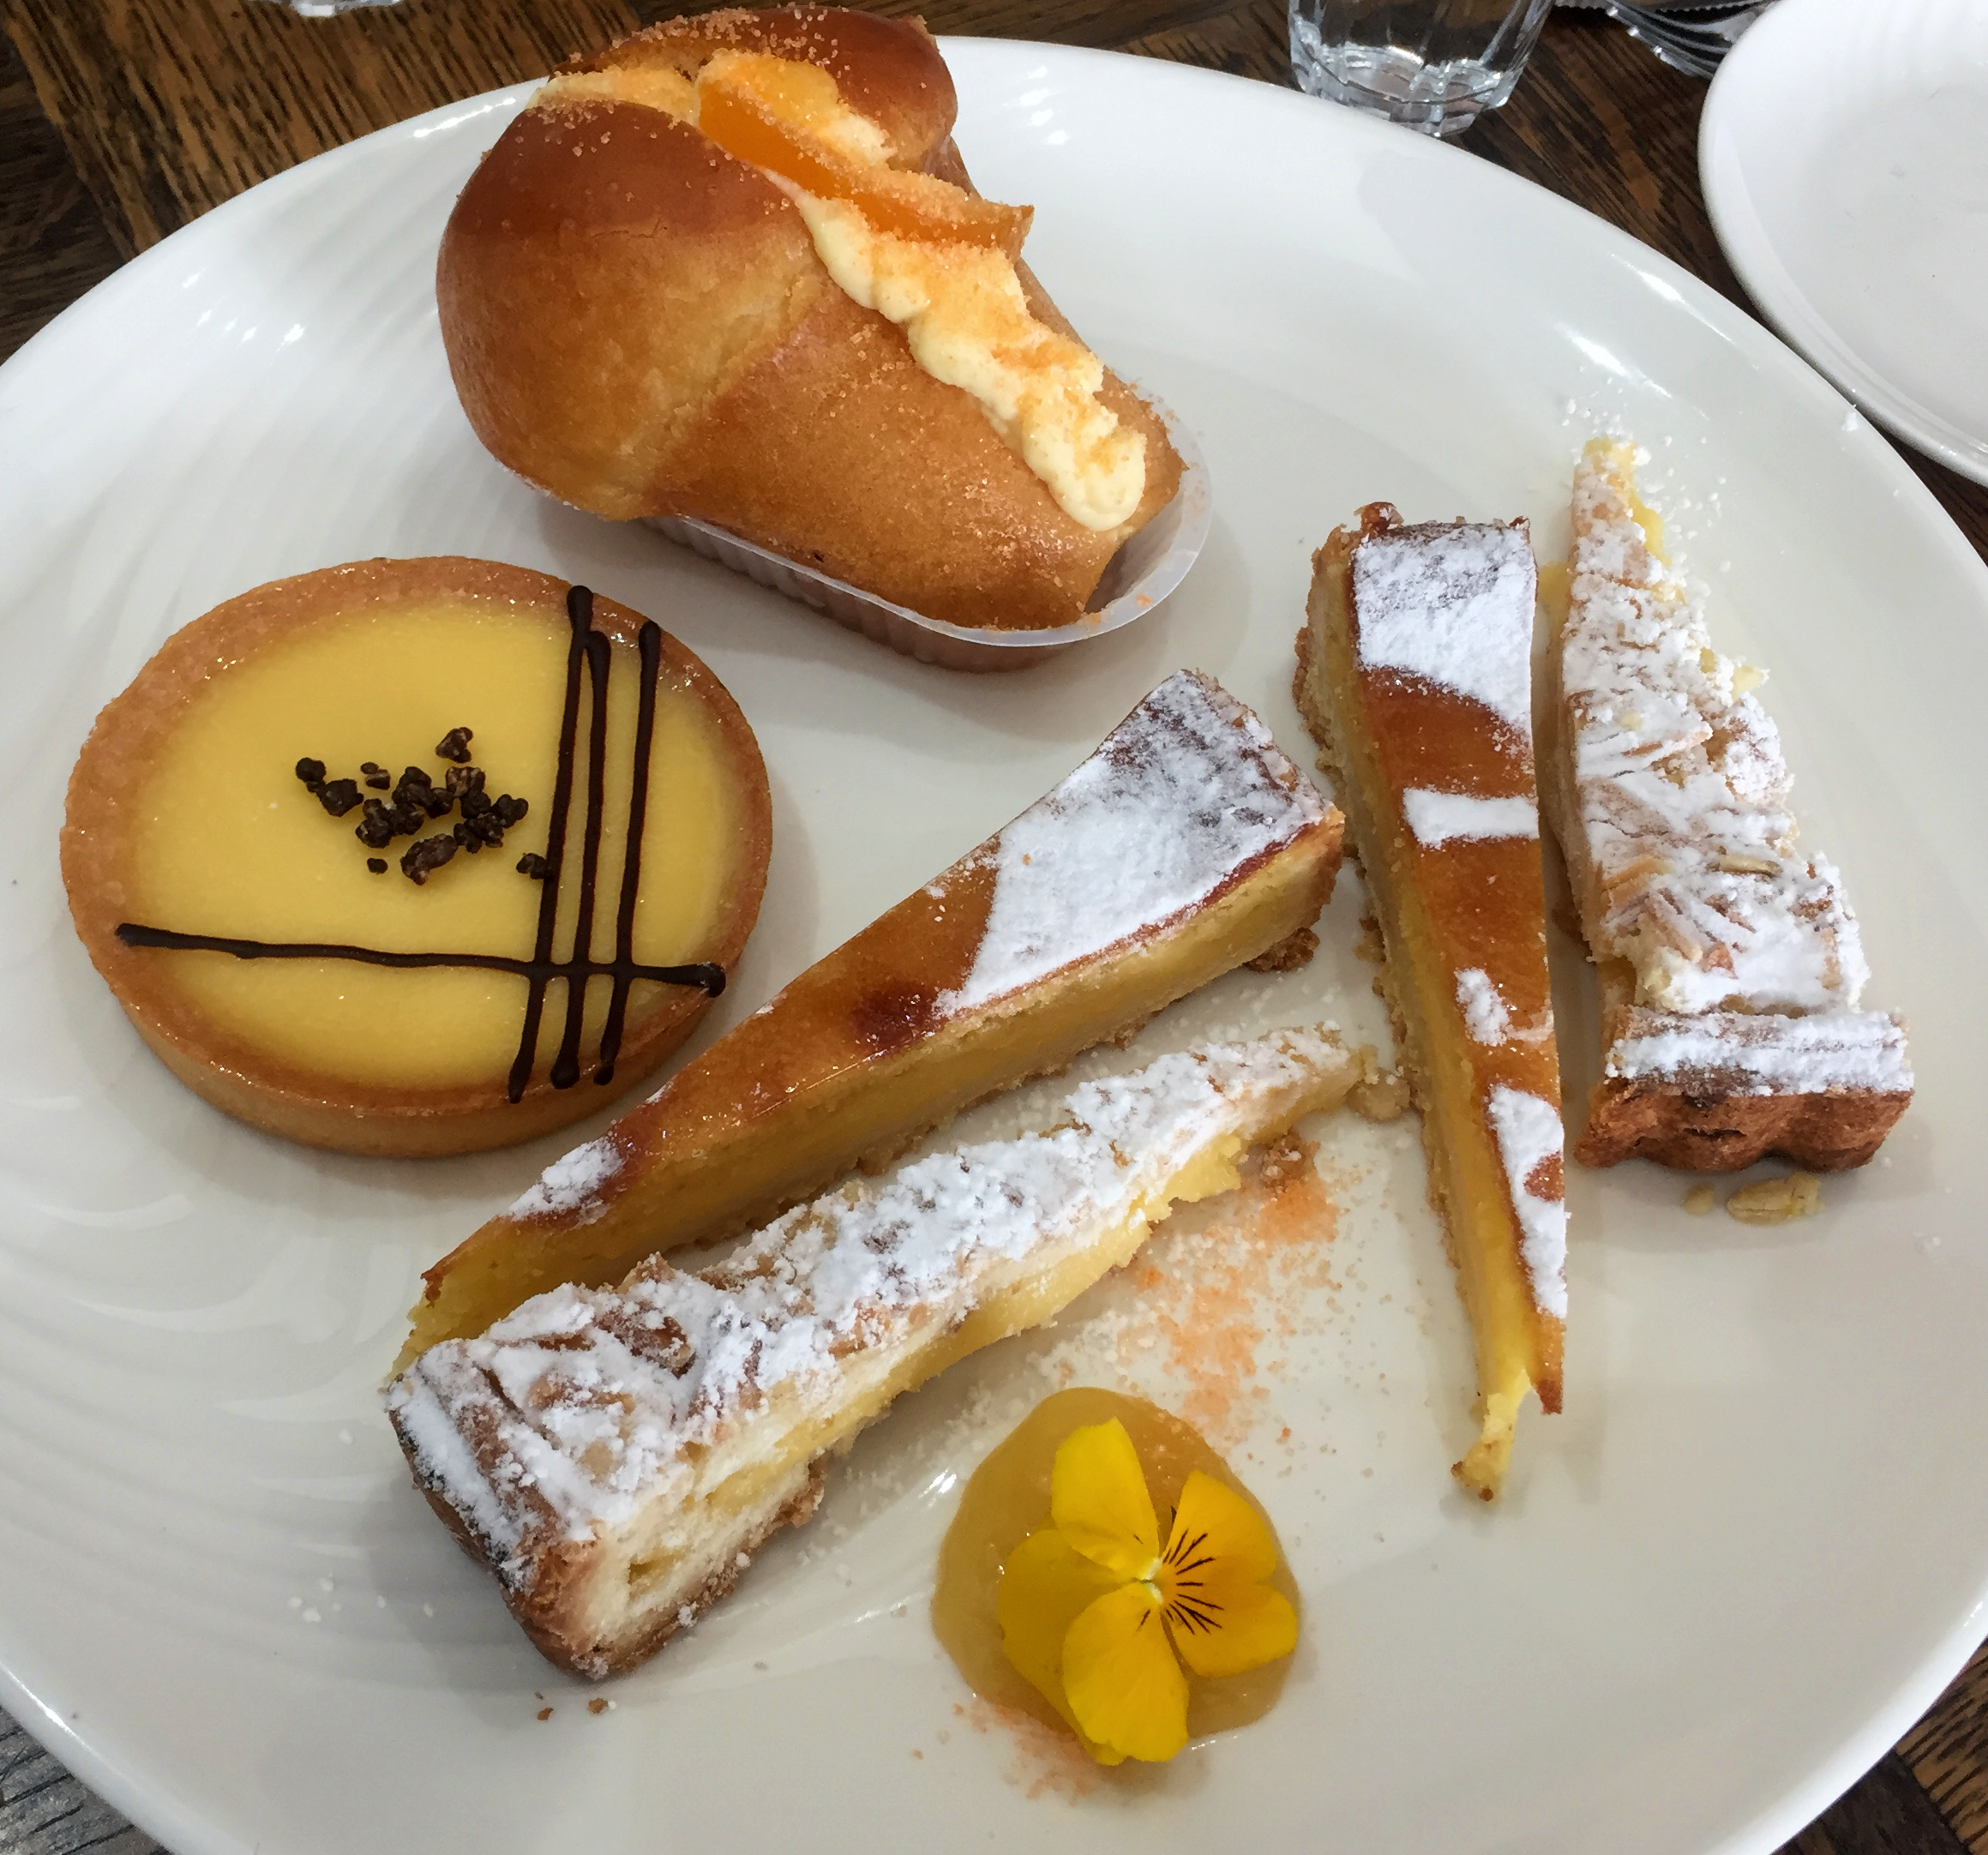 Our sharing plate of lemon-based desserts and a rum baba at the top